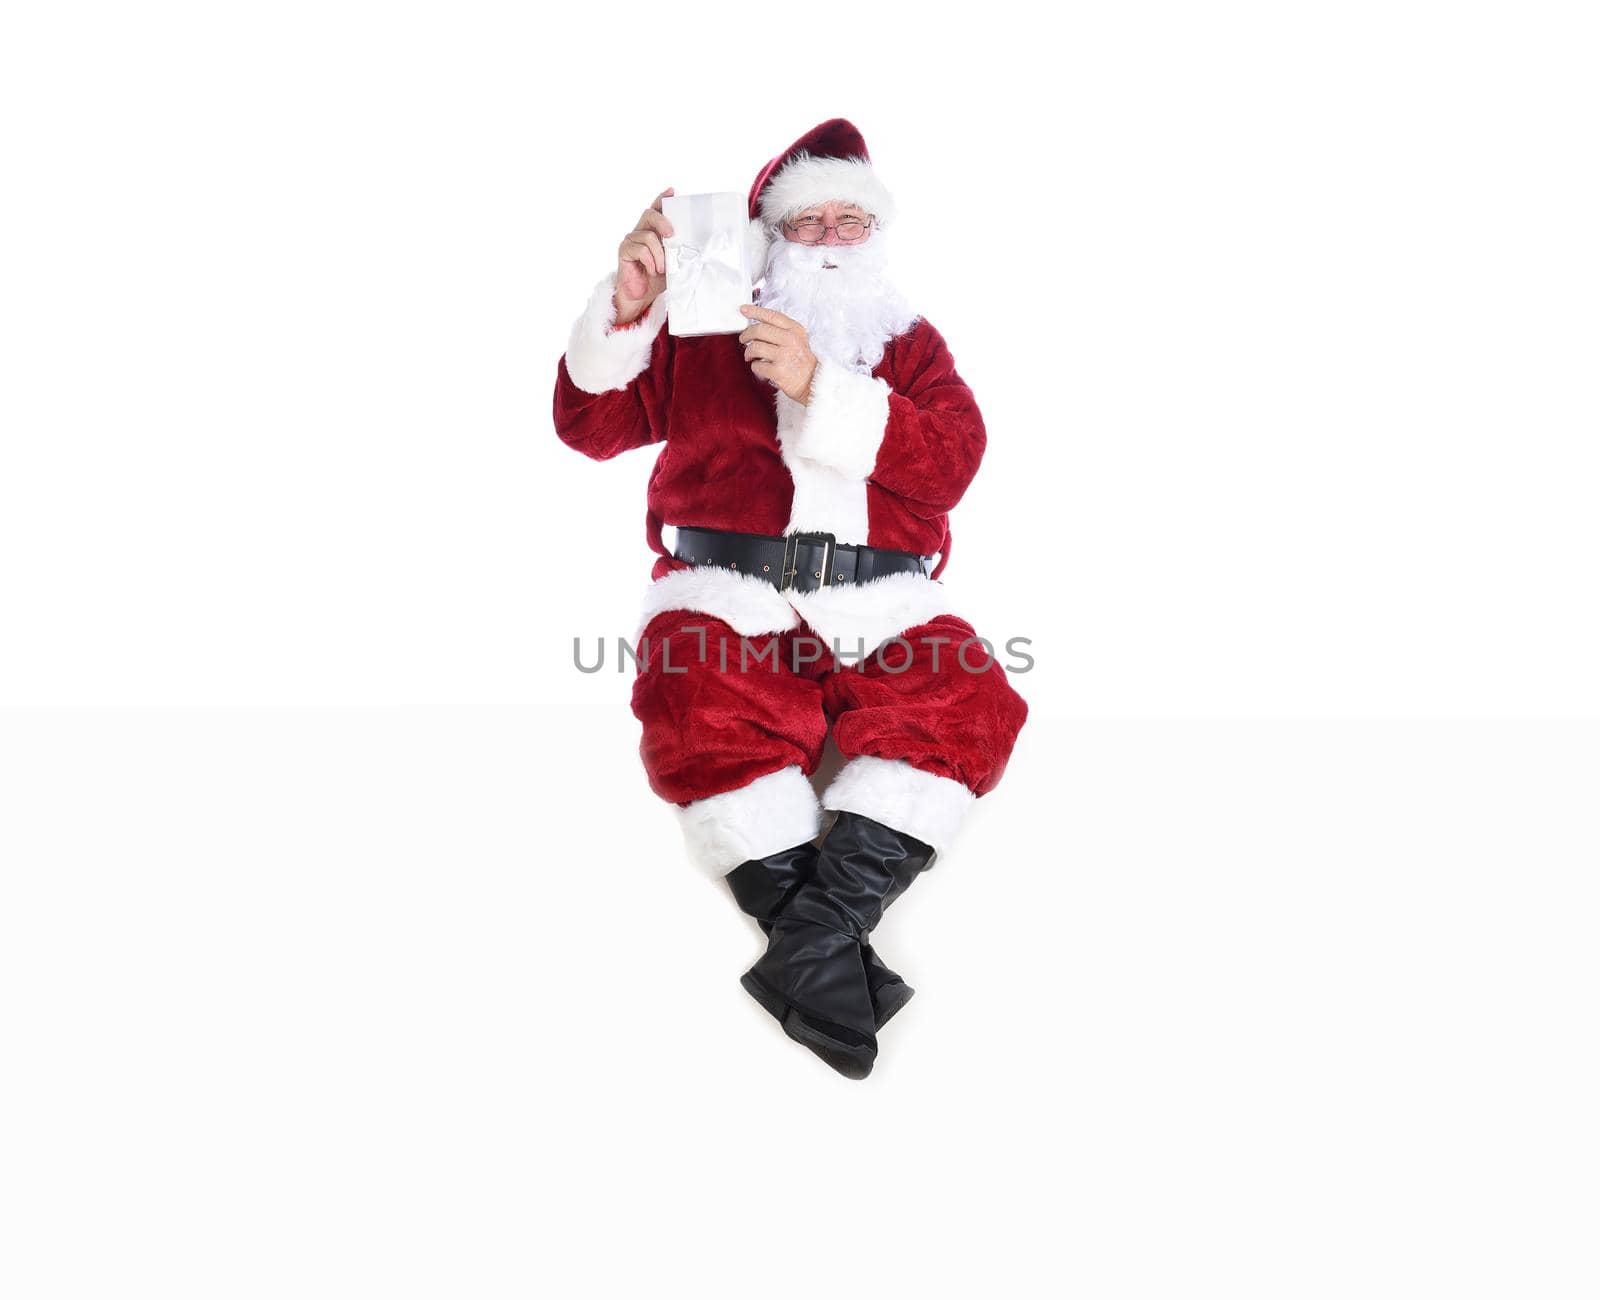 Senior man in traditional Santa Claus Suit sitting on a white wall holding a wrapped Christmas Present.  Isolated on white with copy space.